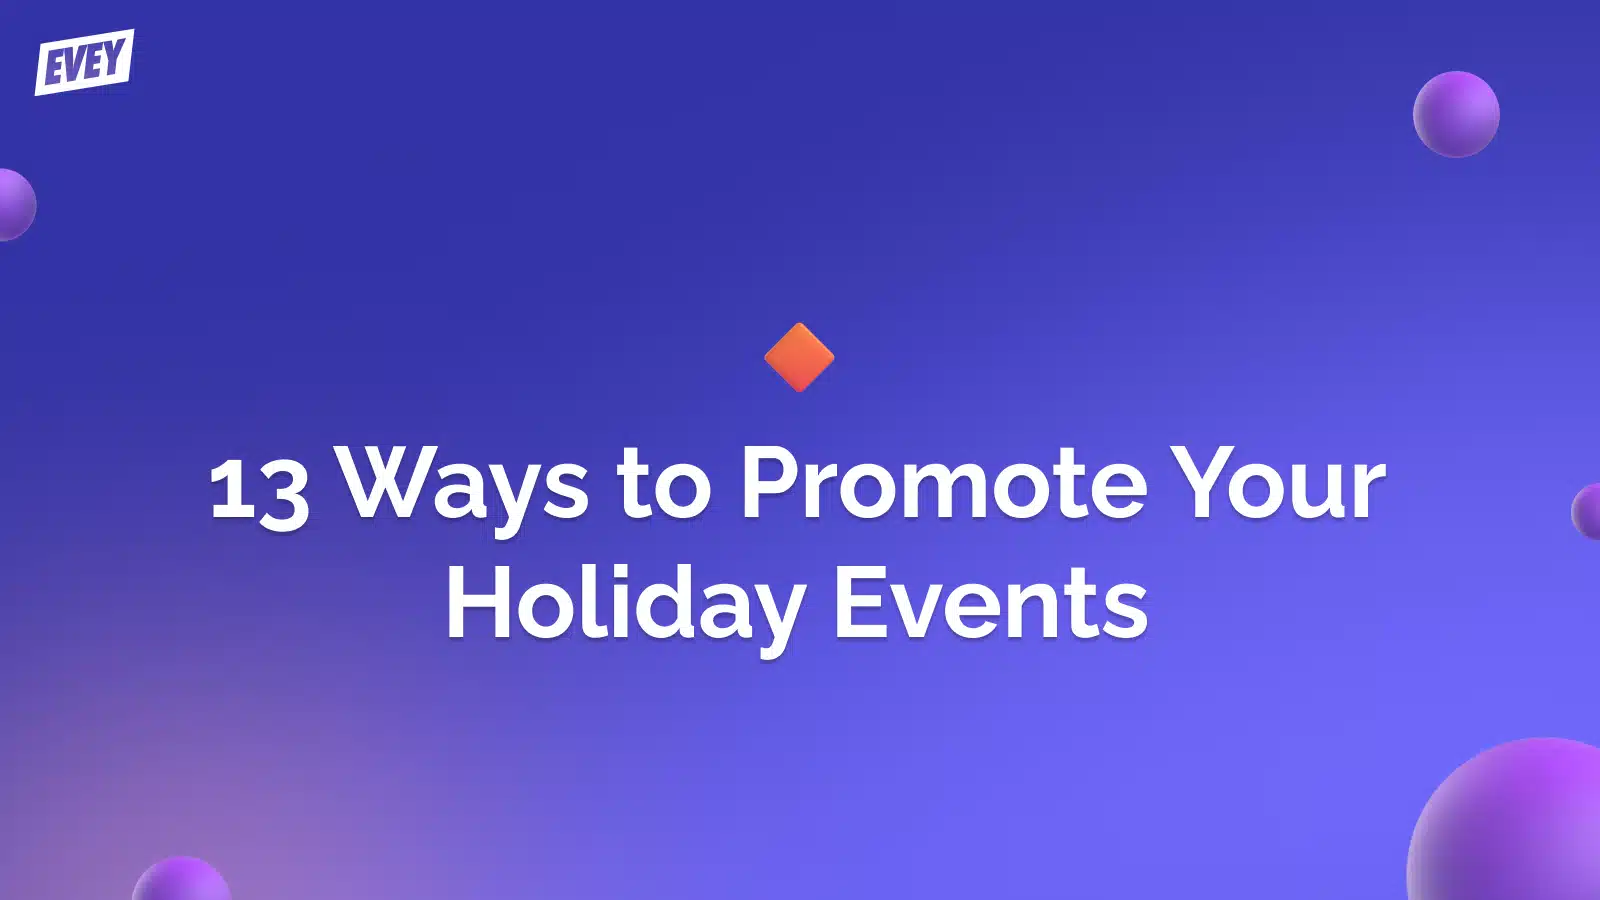 13 Ways to Promote Your Holiday Events Effectively on Your Shopify Platform